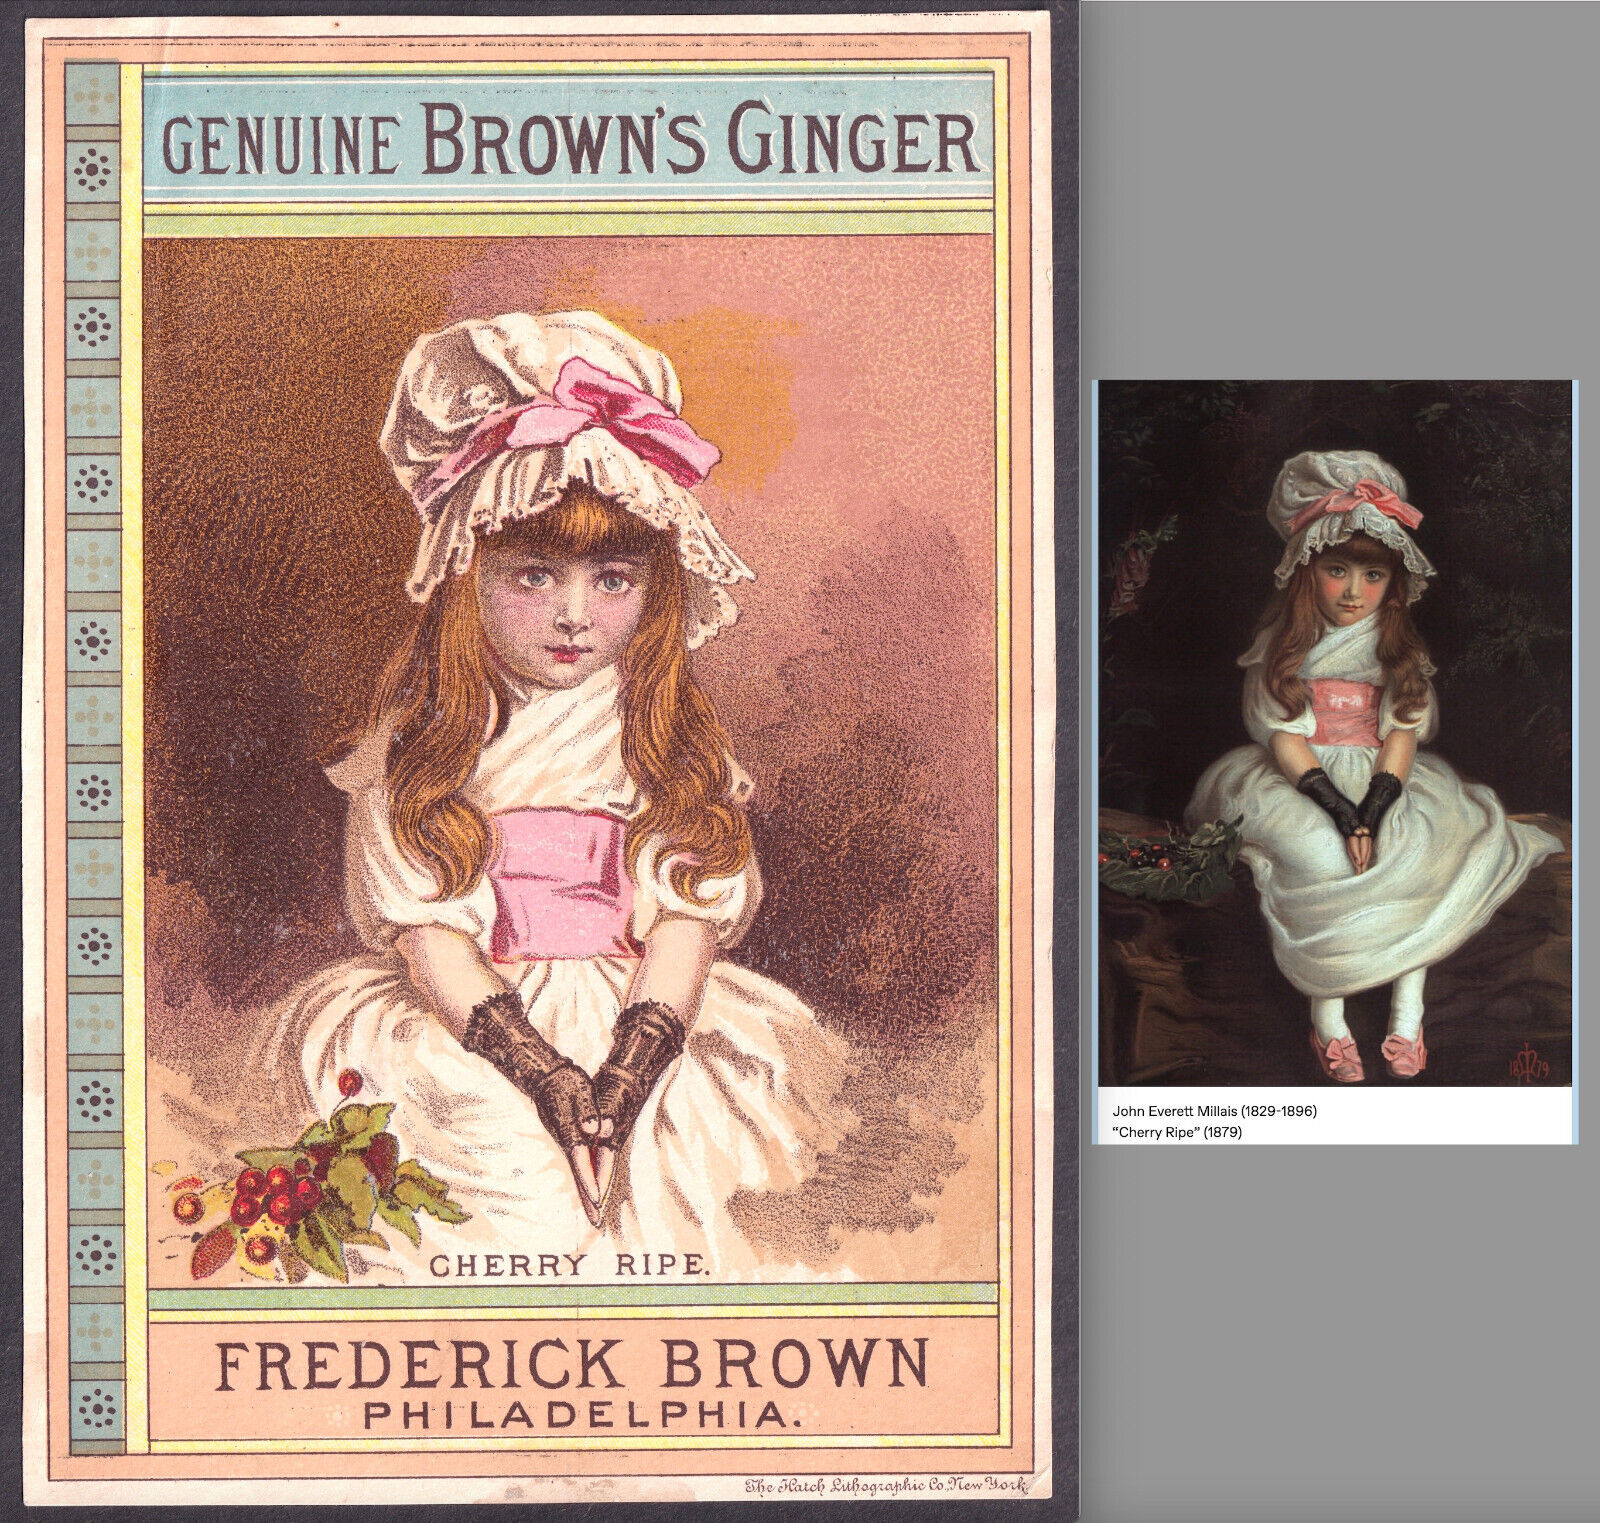 Cherry Ripe 1800's Lithograph 5x7 Browns Ginger Drink Tragic Death Ad Trade Card